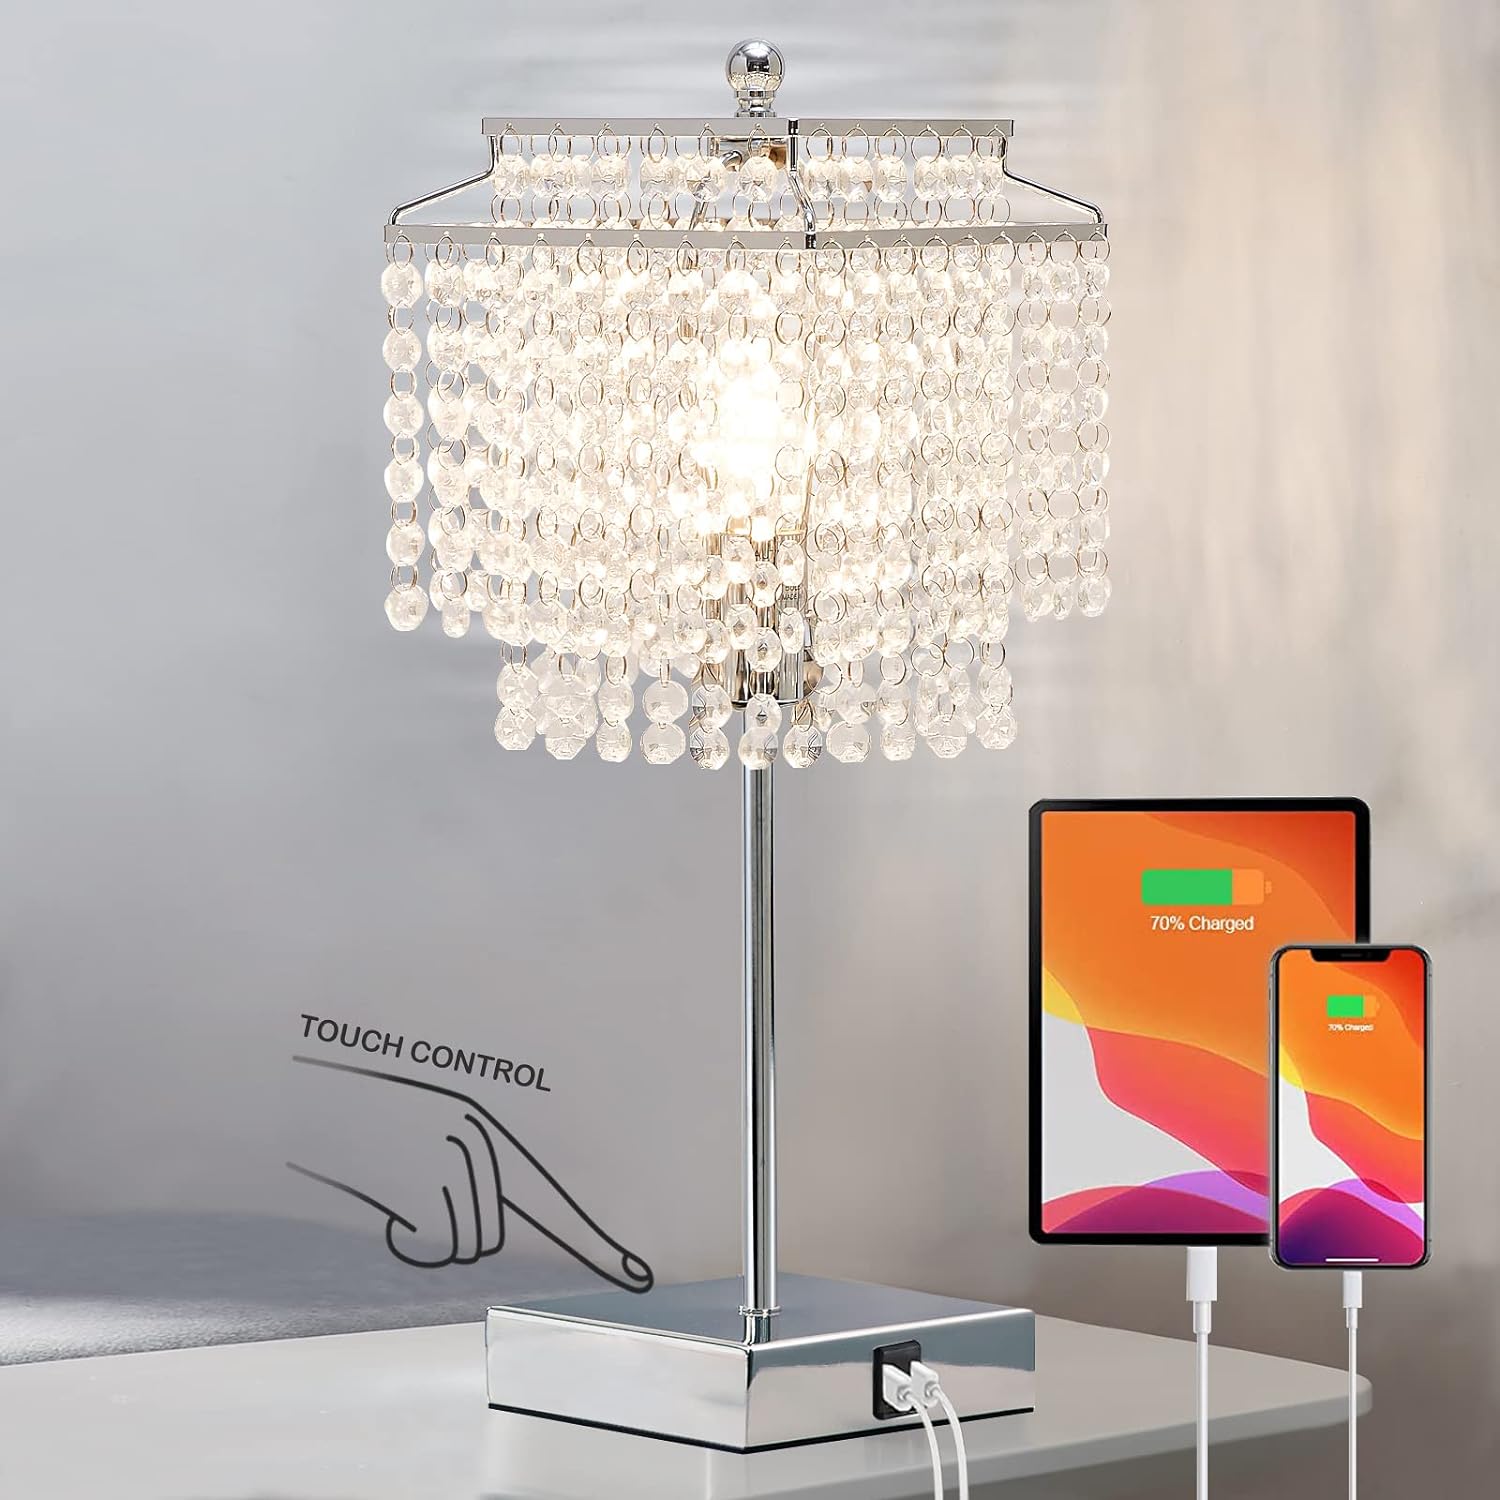 Luvkczc Crystal Table Lamp with Touch Control, USB Bedside Crystal Table Lamp, 3-Way Dimmable Lamp with Crystal Shade for Bedroom, Livi